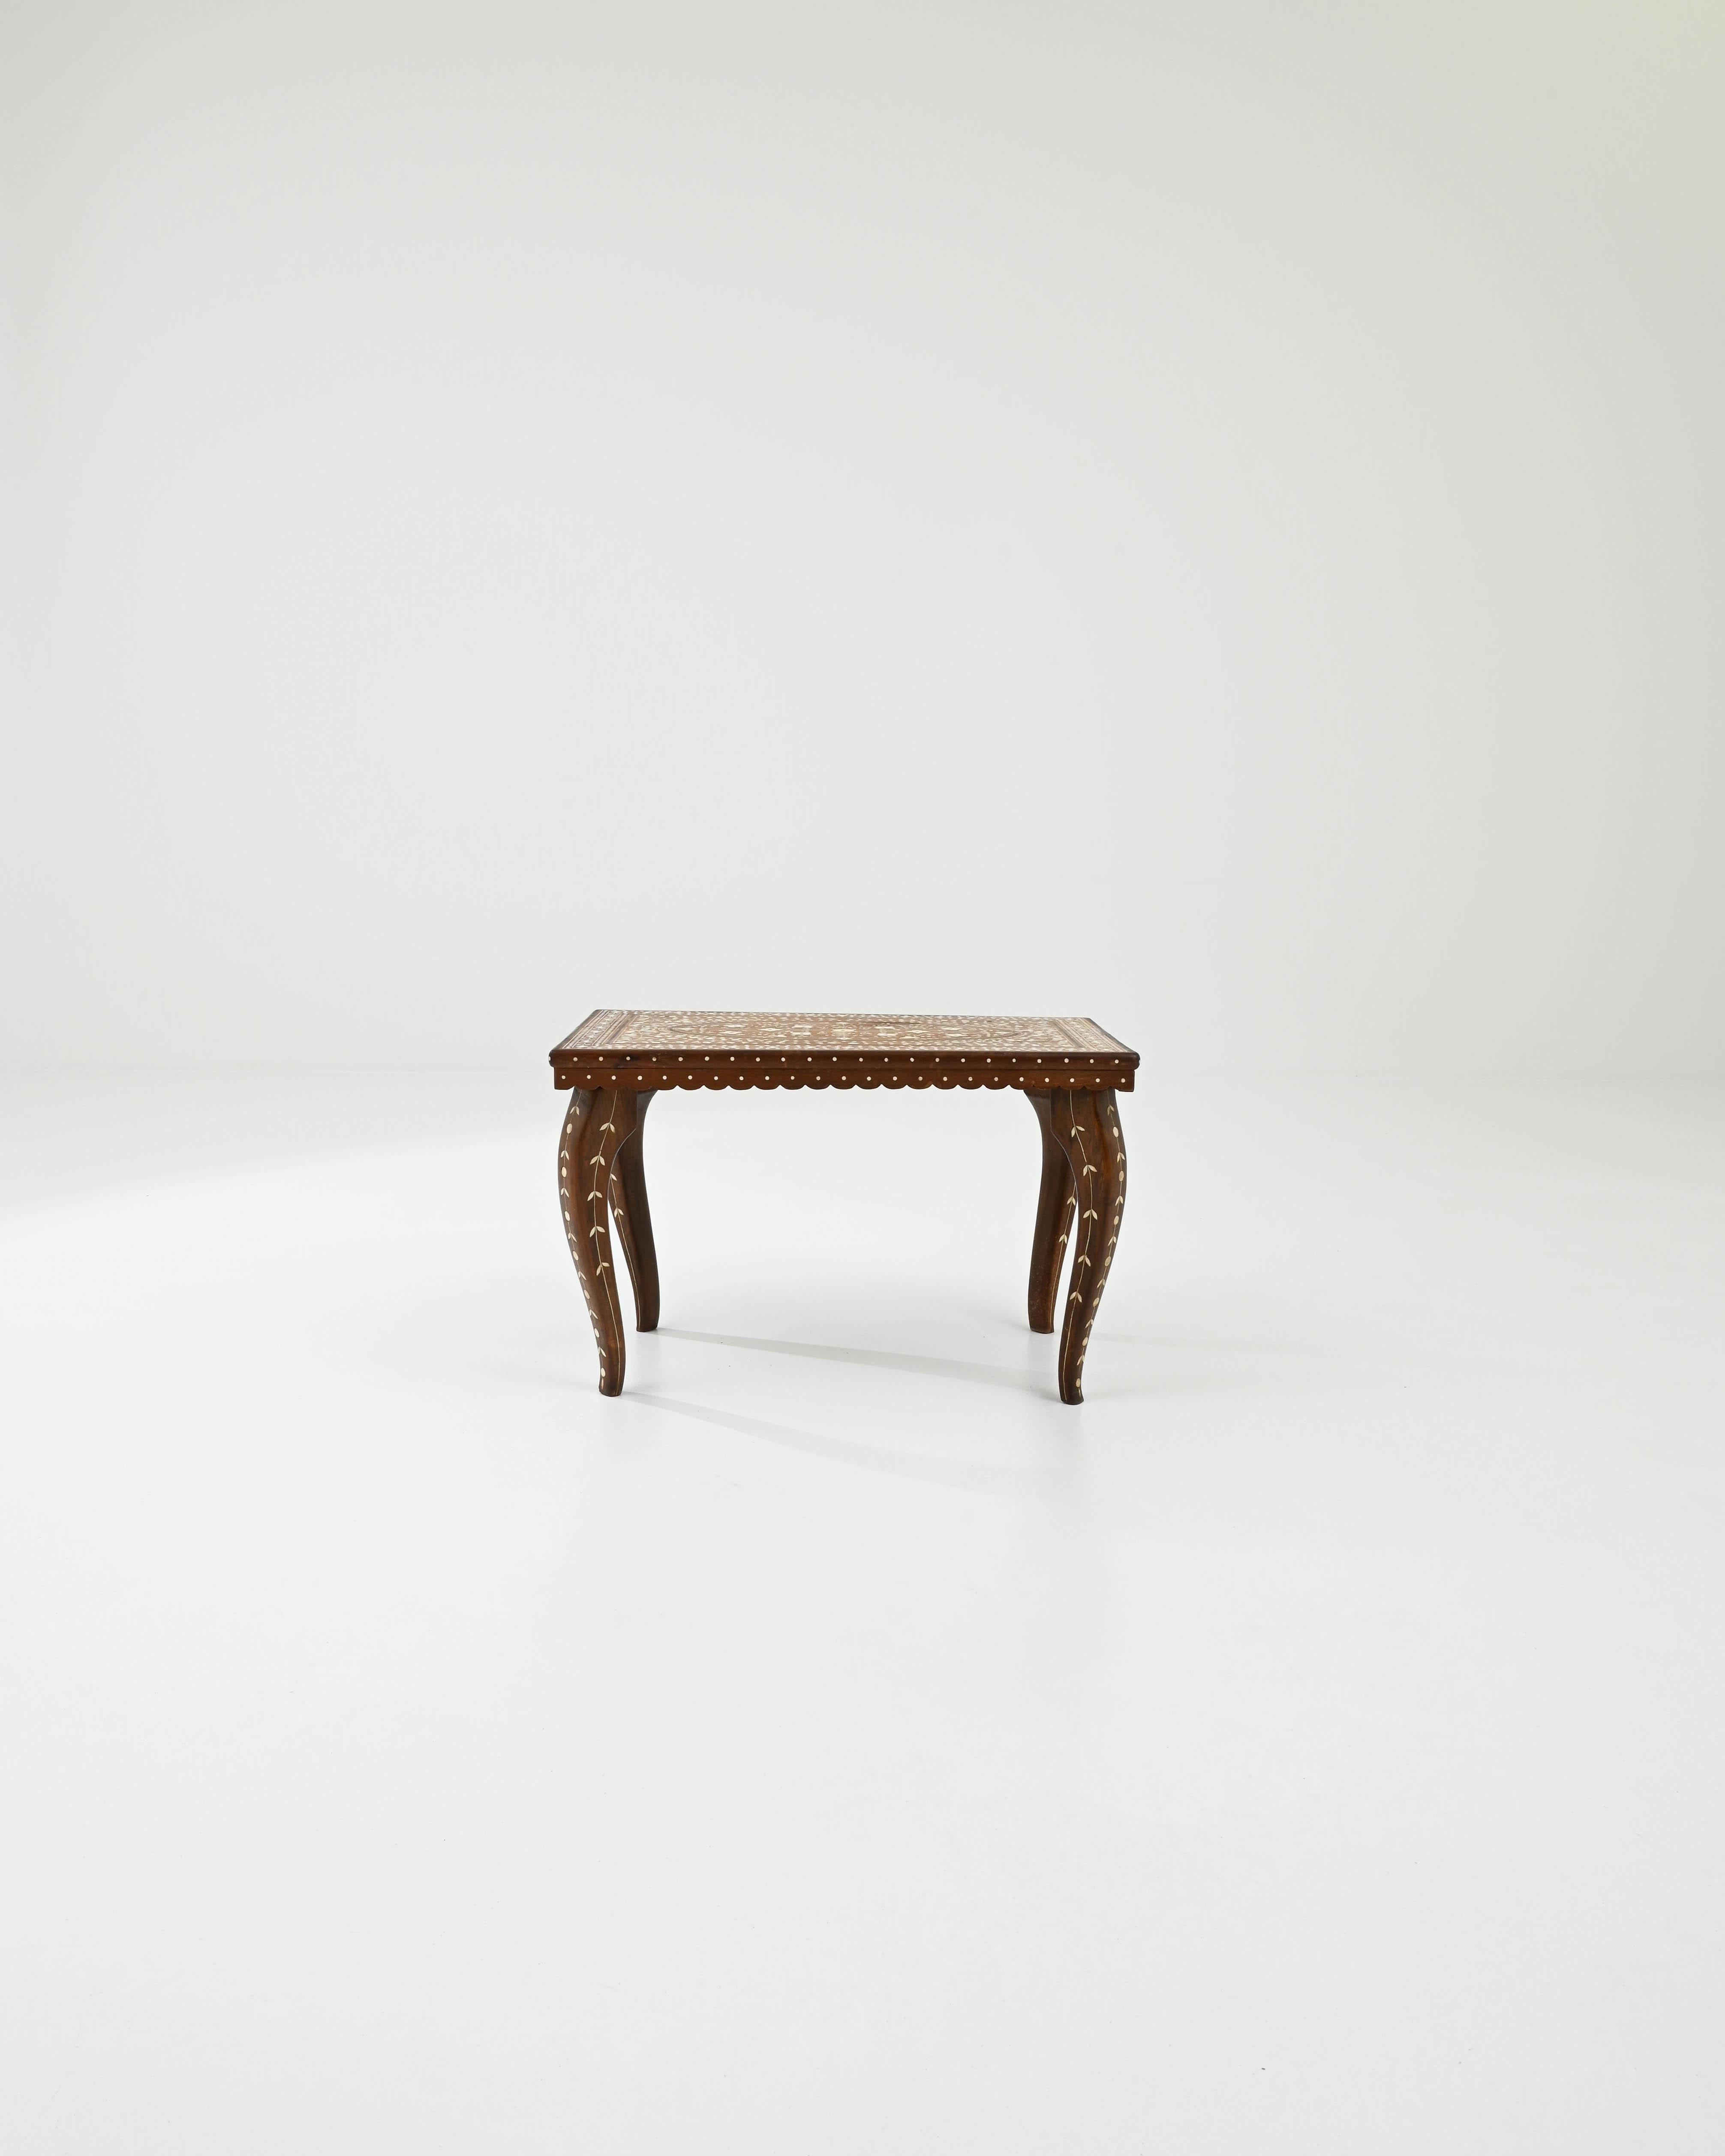 Ornate and beautifully crafted, this vintage wooden coffee table makes an endlessly mesmerizing accent. Hand-built in Africa in the 20th century, a rectangular tabletop with a scalloped apron sits atop graceful cabriole legs. Intricate patterns of